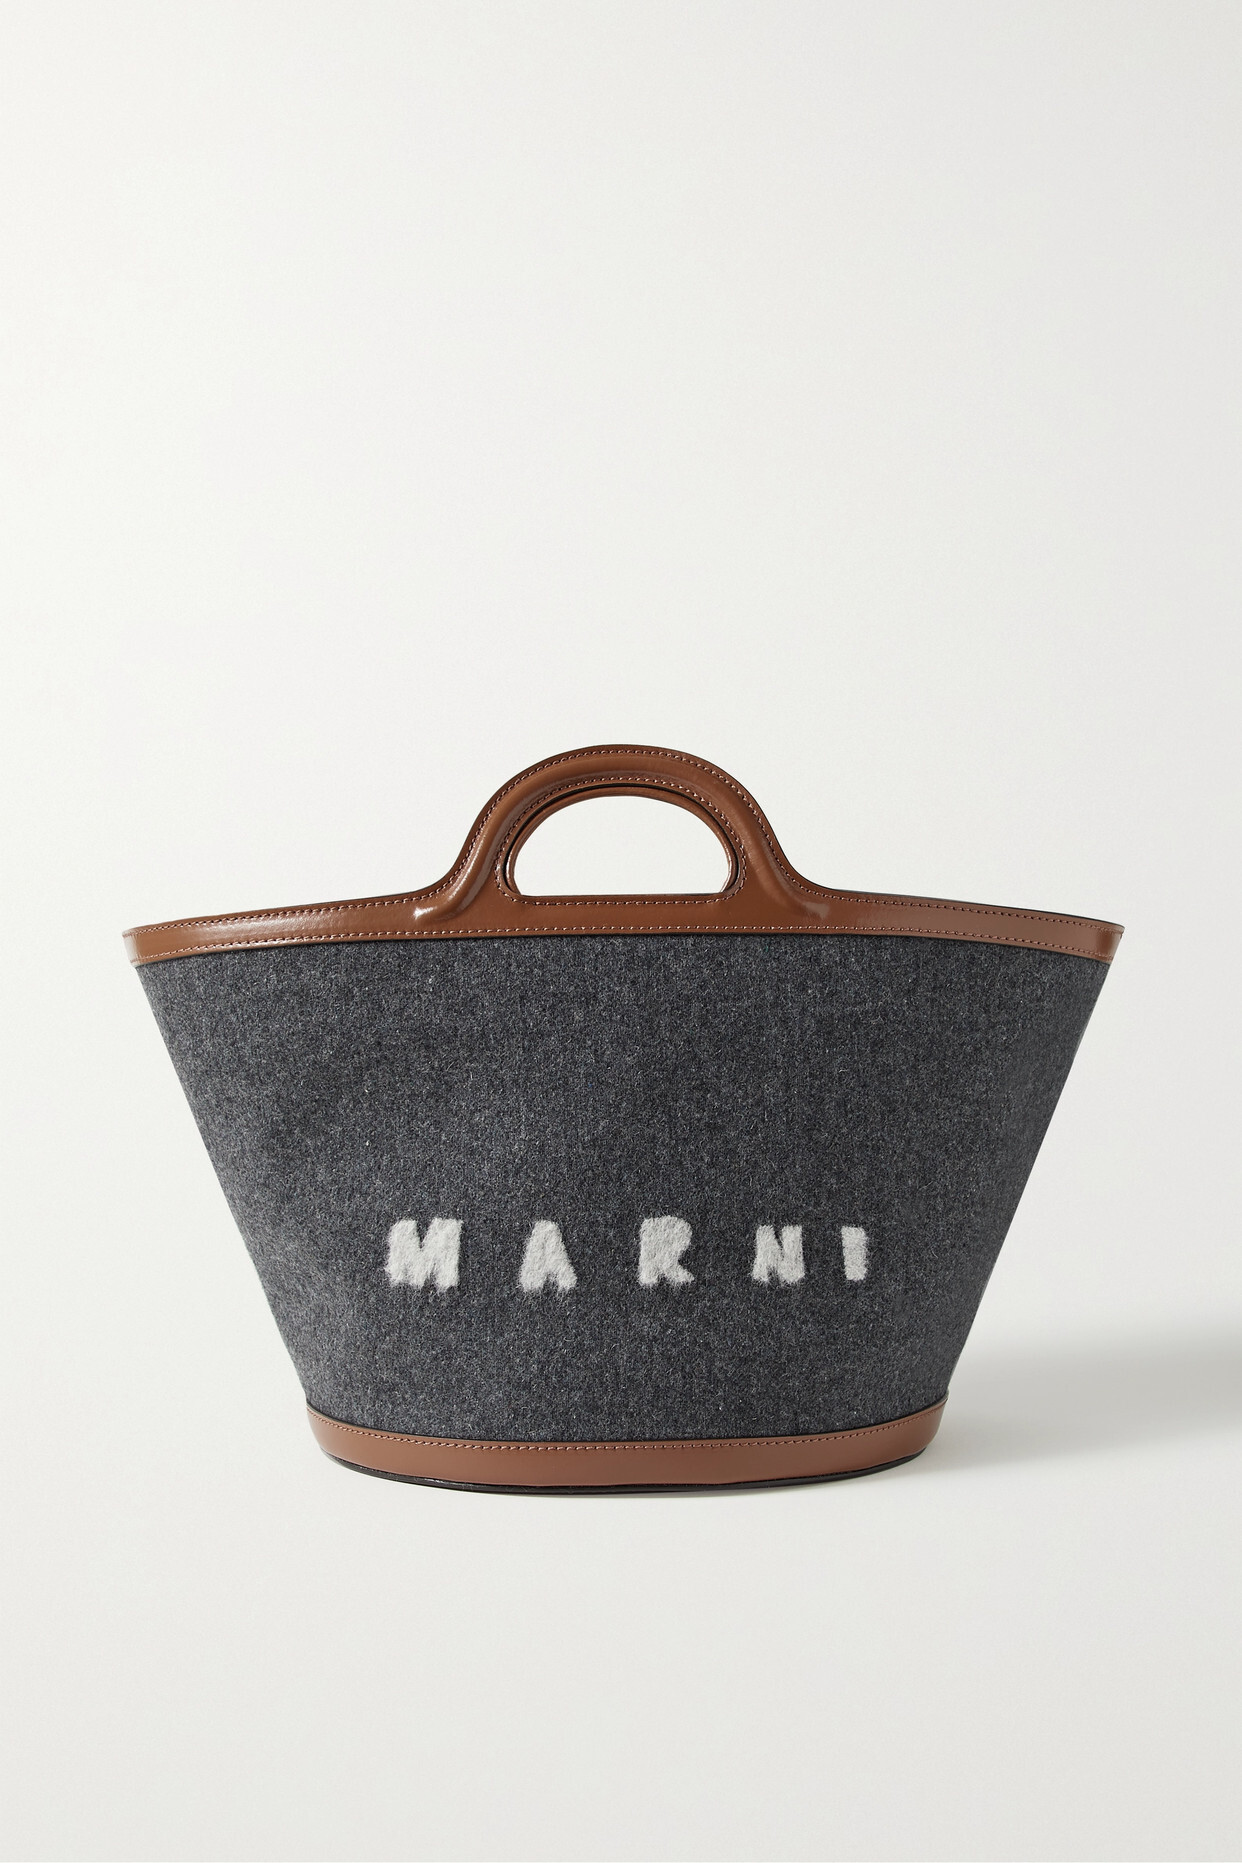 Marni - Tropicalia Small Leather-trimmed Wool-blend Felt Tote - Gray